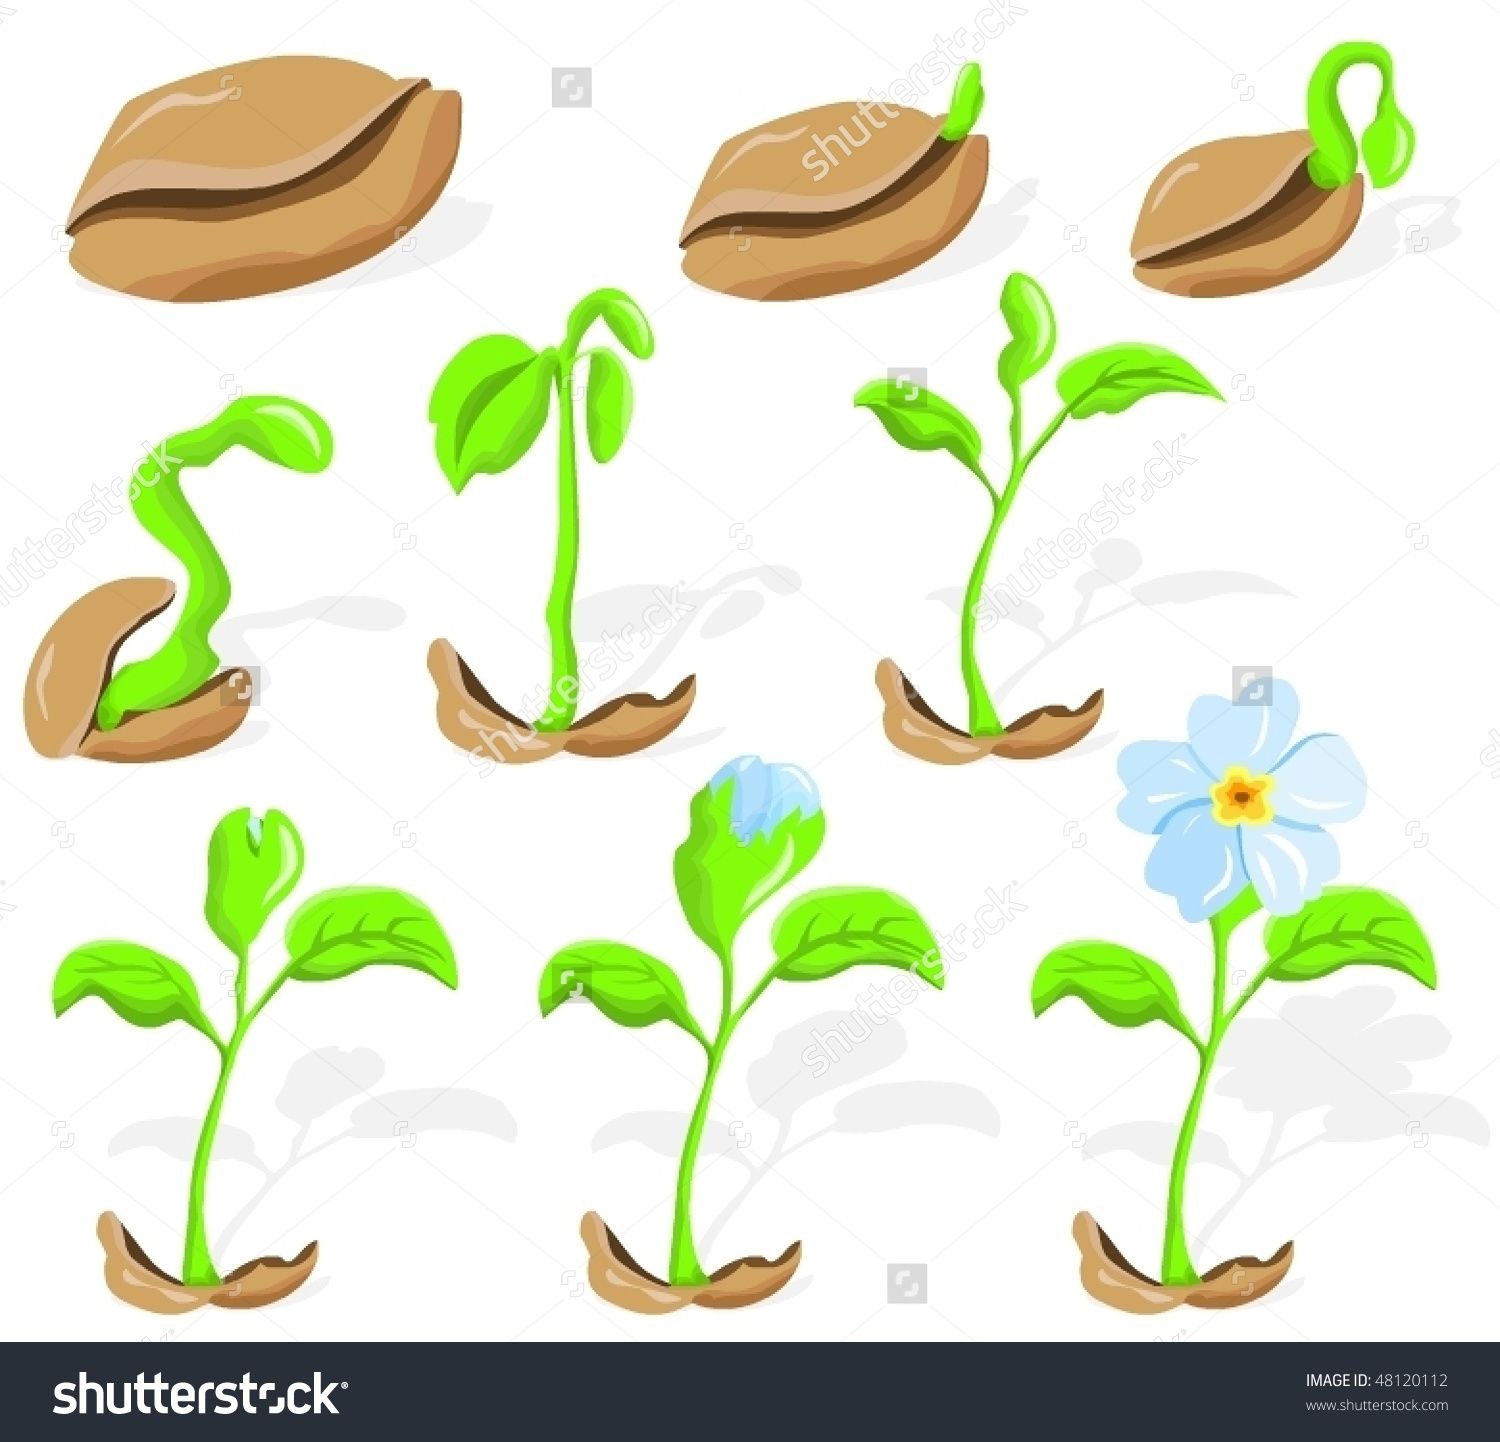 Seedling clipart spring. Pin by annie on